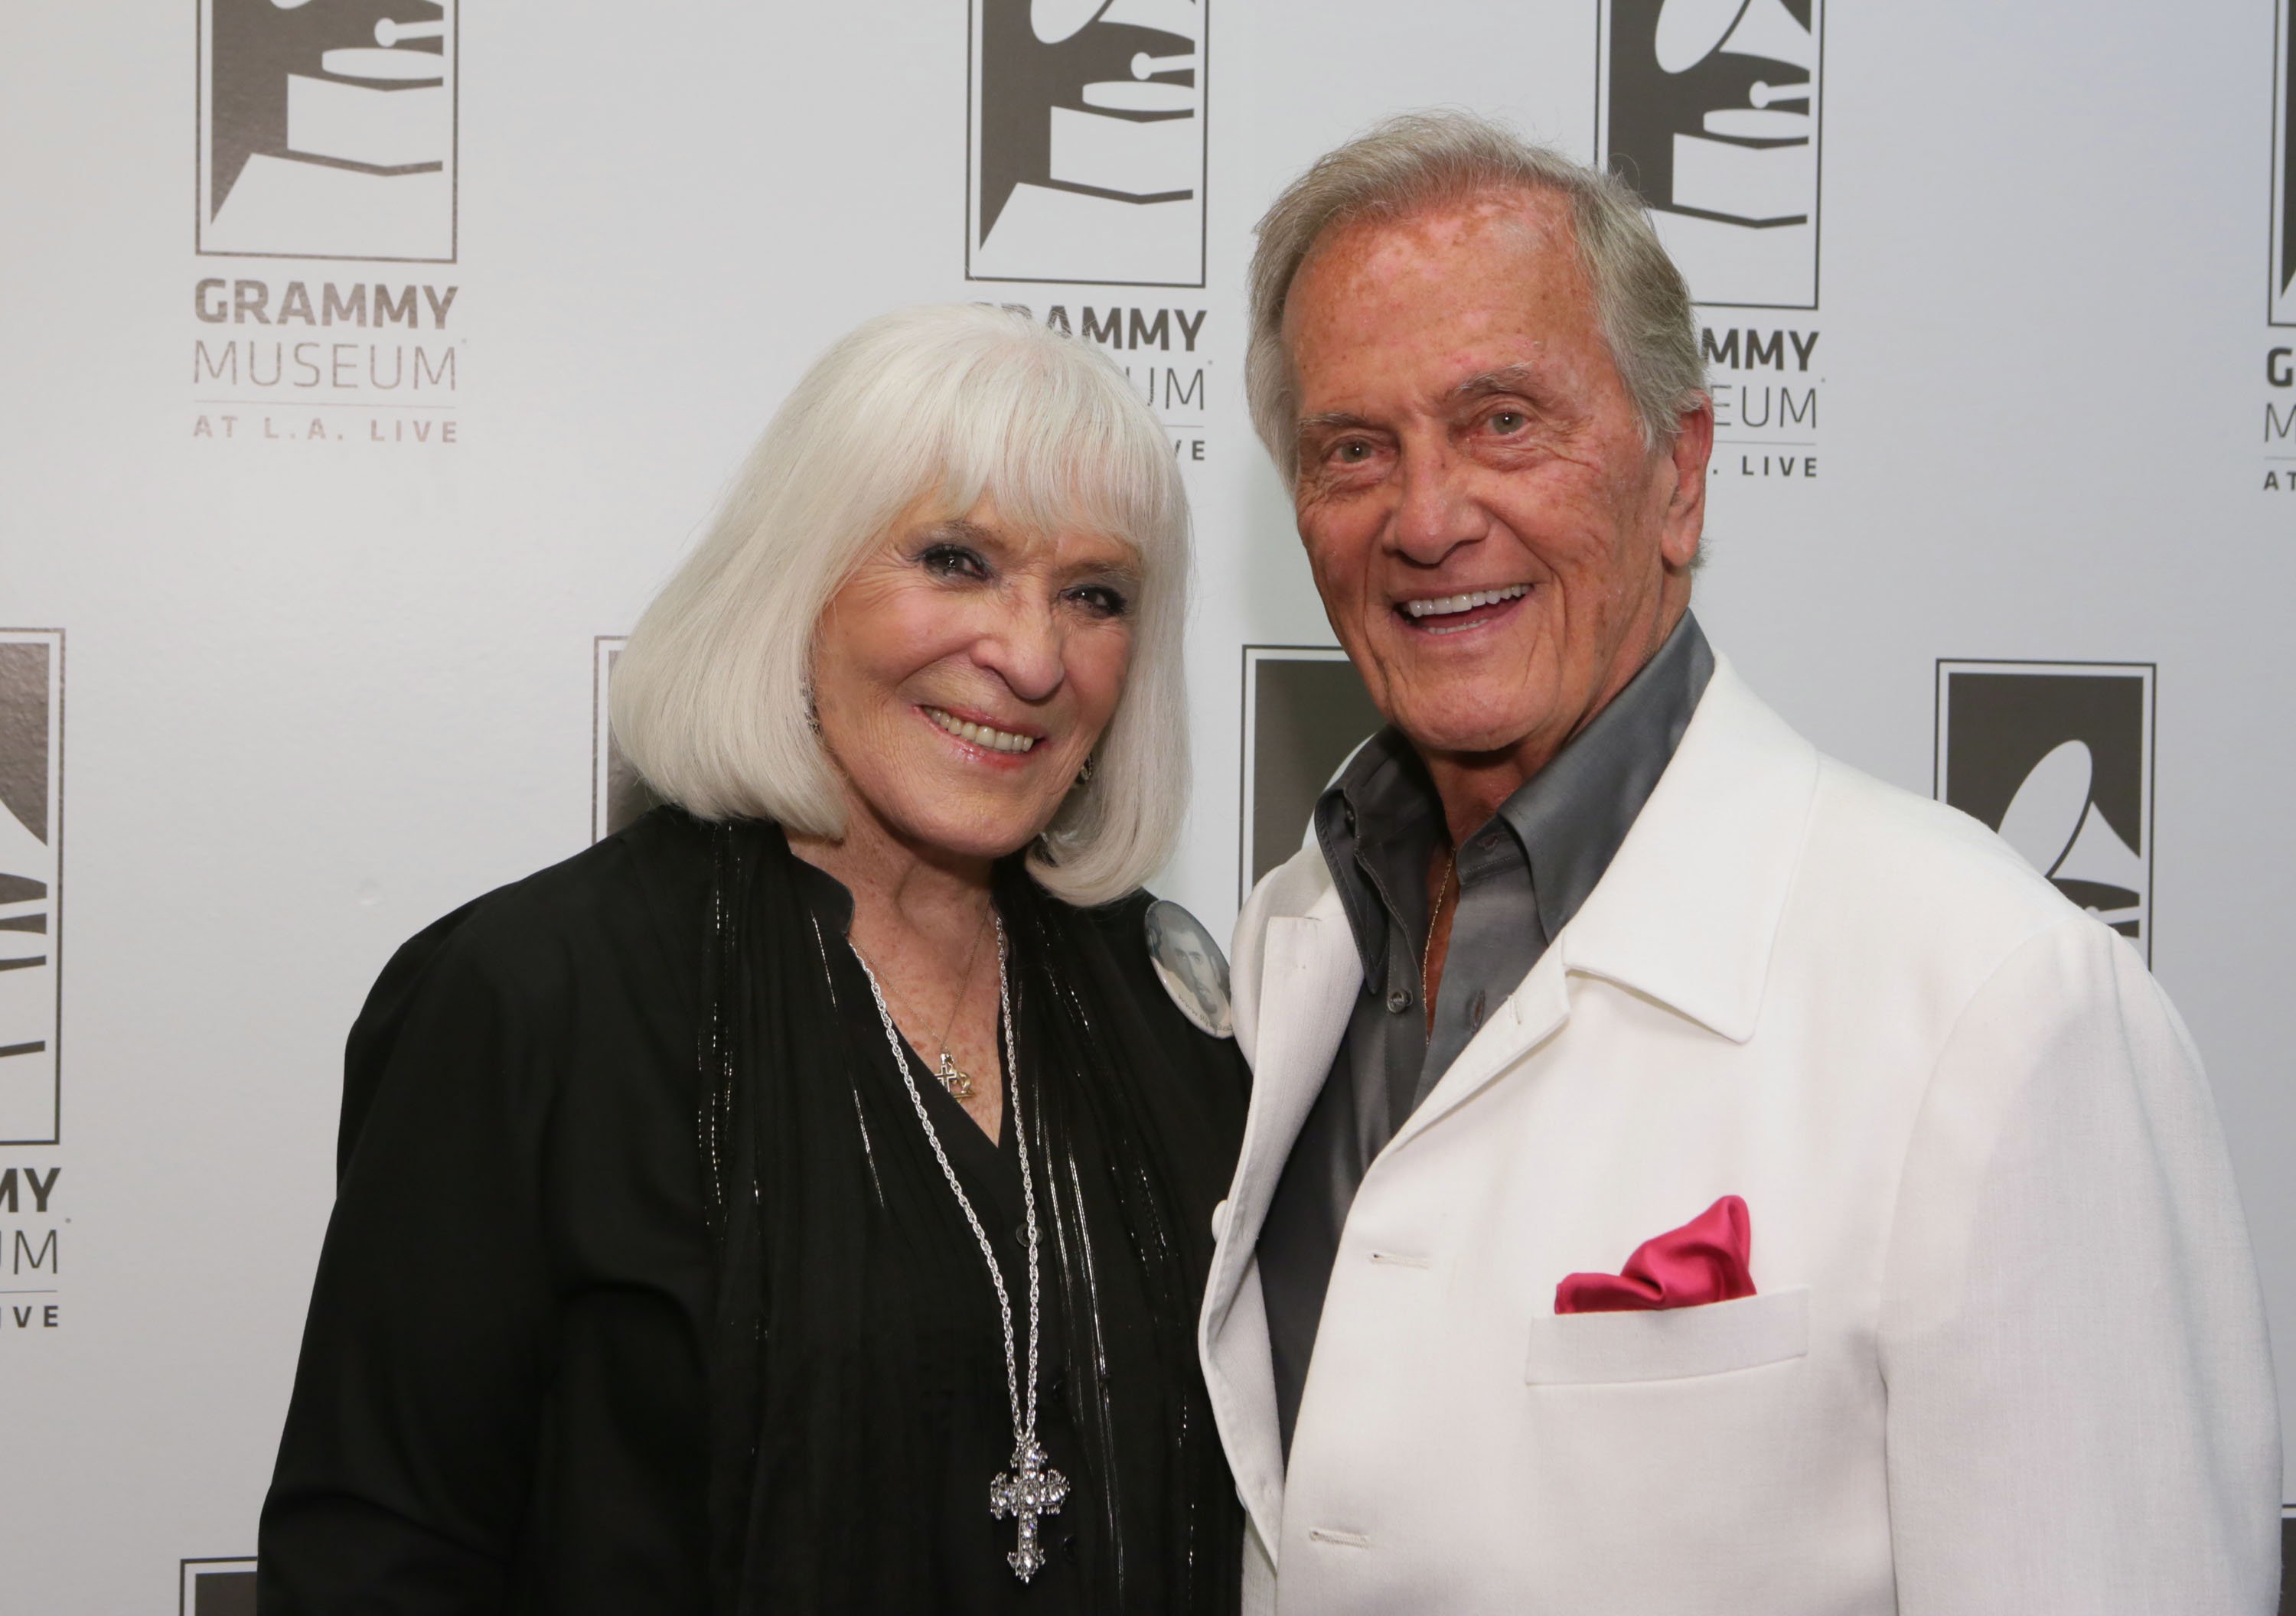 Shirley and Pat Boone at An Evening With Pat Boone at The Grammy Museum on June 2, 2015, in Los Angeles, California. | Source: Getty Images